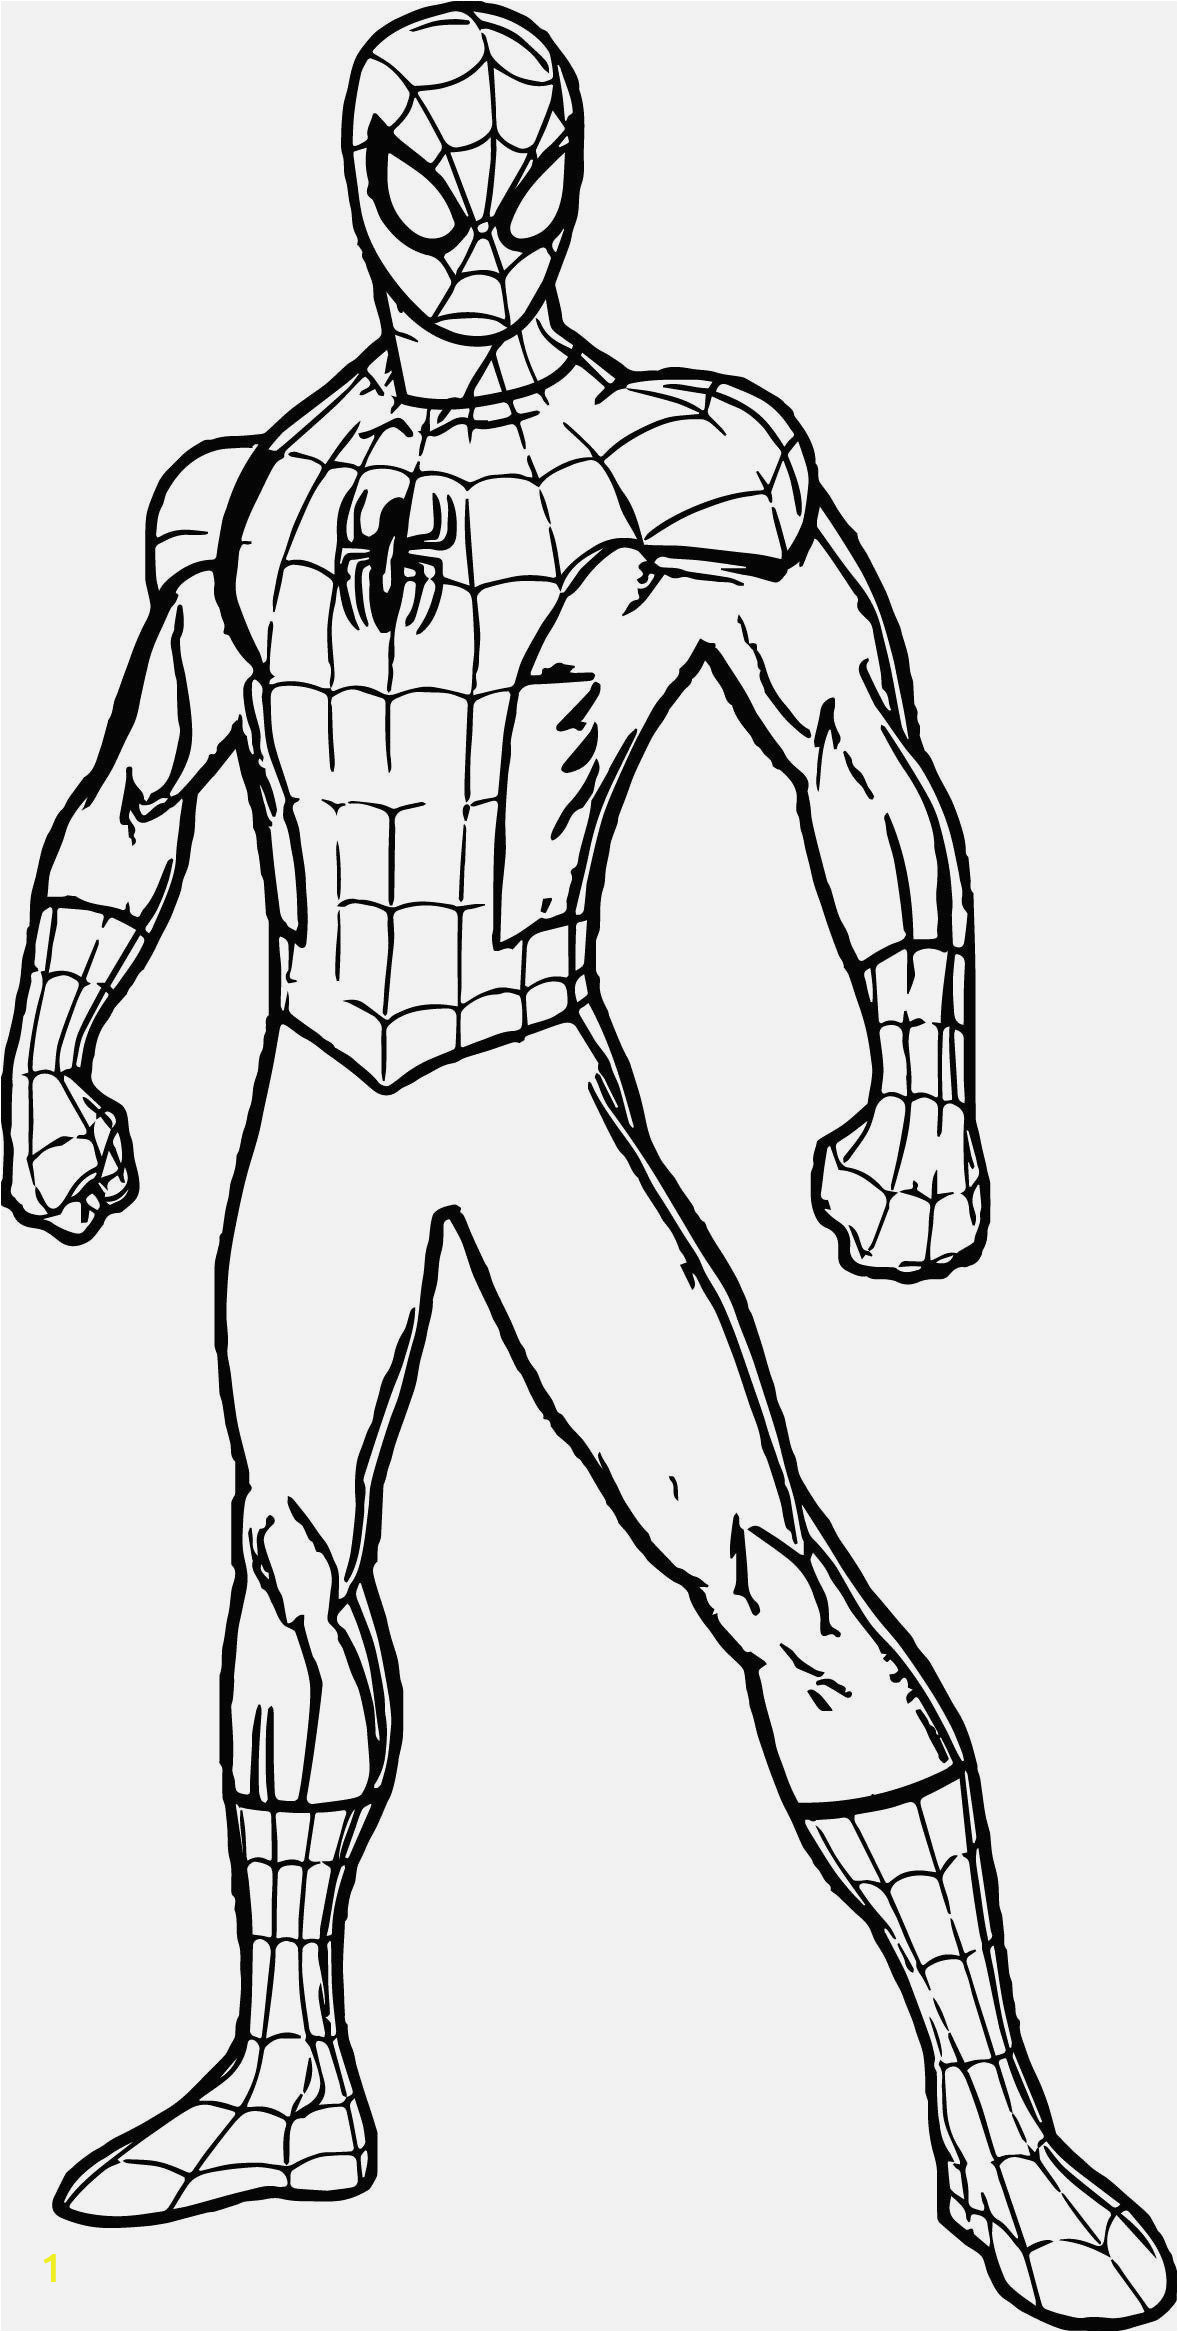 Spider Man Homecoming Coloring Pages Marvelous Image Of Free Spiderman Coloring Pages